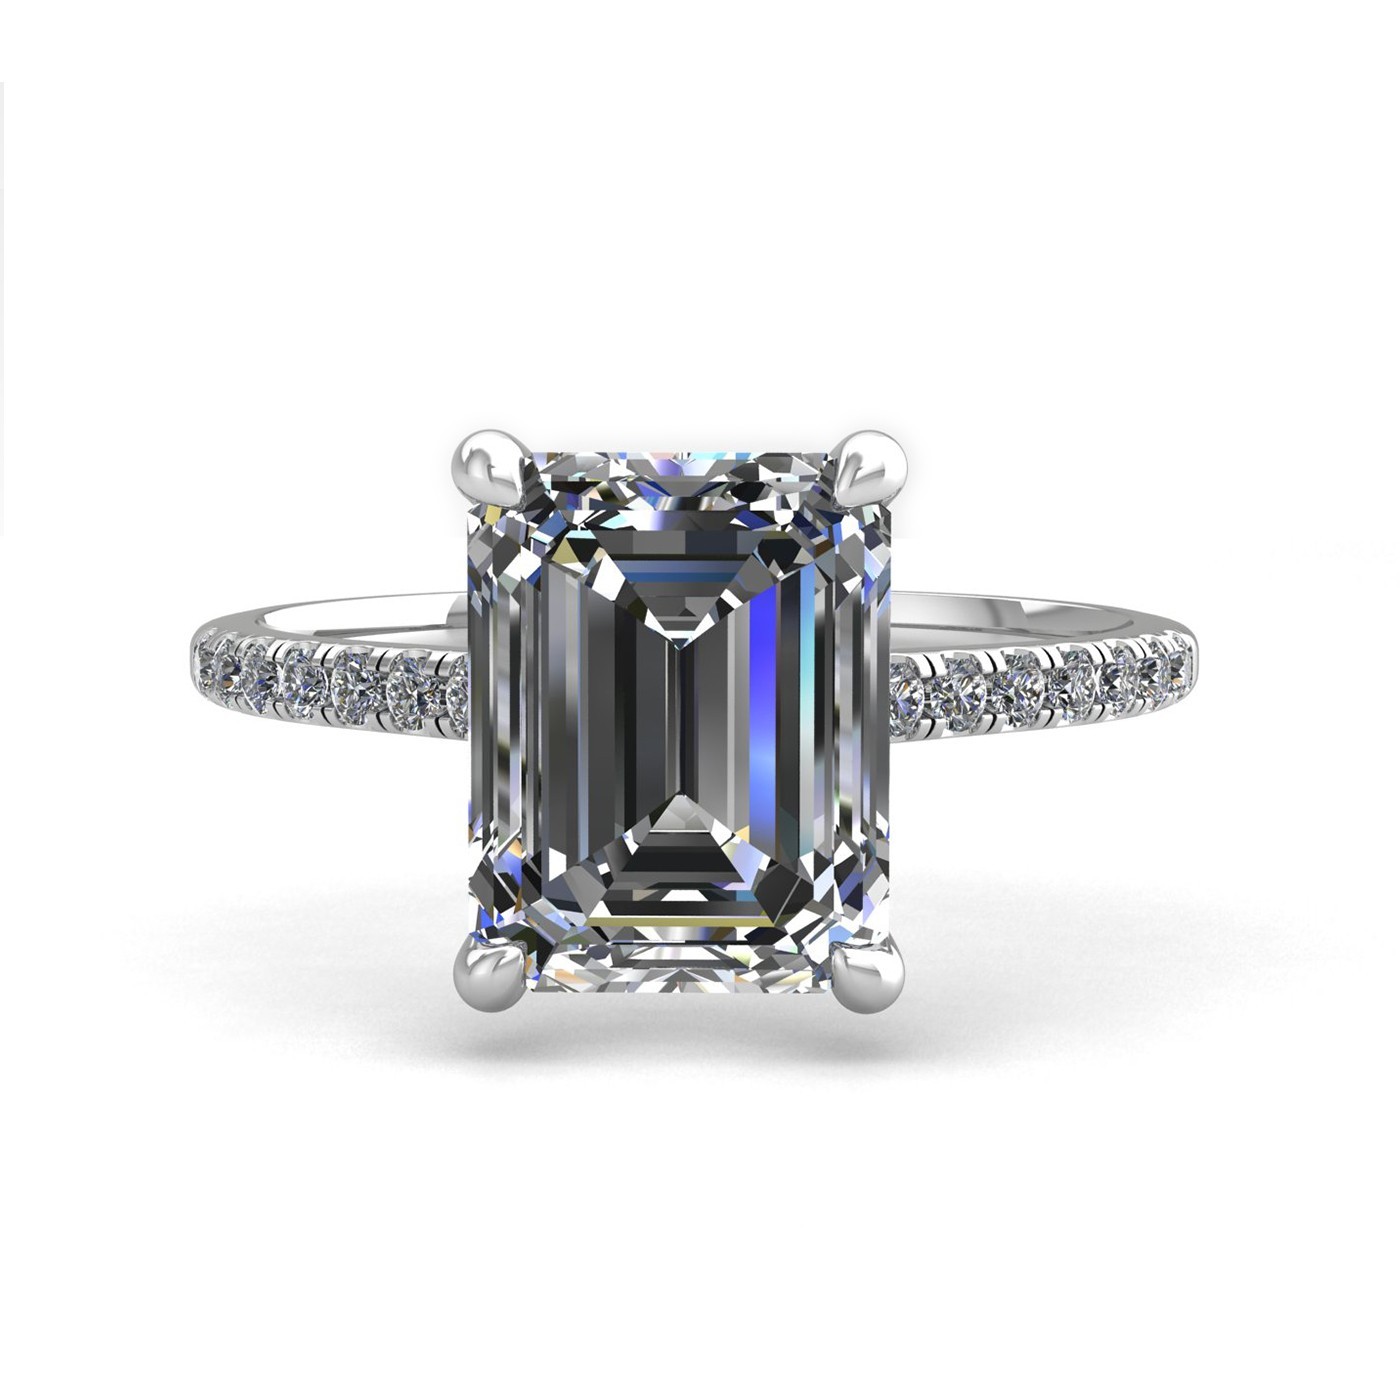 18k white gold 1.20ct 4 prongs emerald cut diamond engagement ring with whisper thin pavÉ set band Photos & images